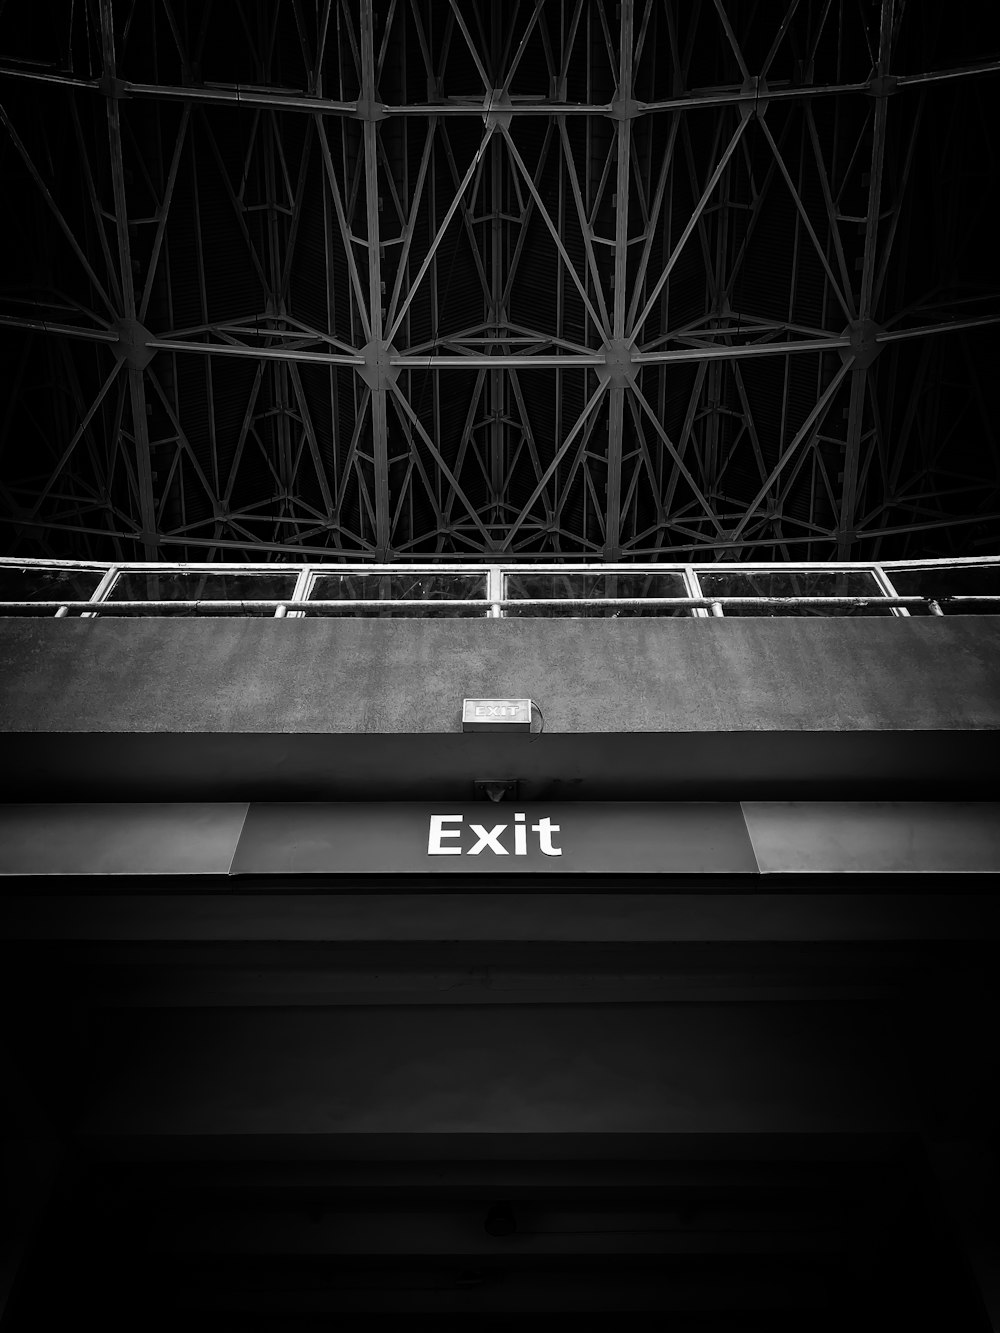 an exit sign is shown in black and white